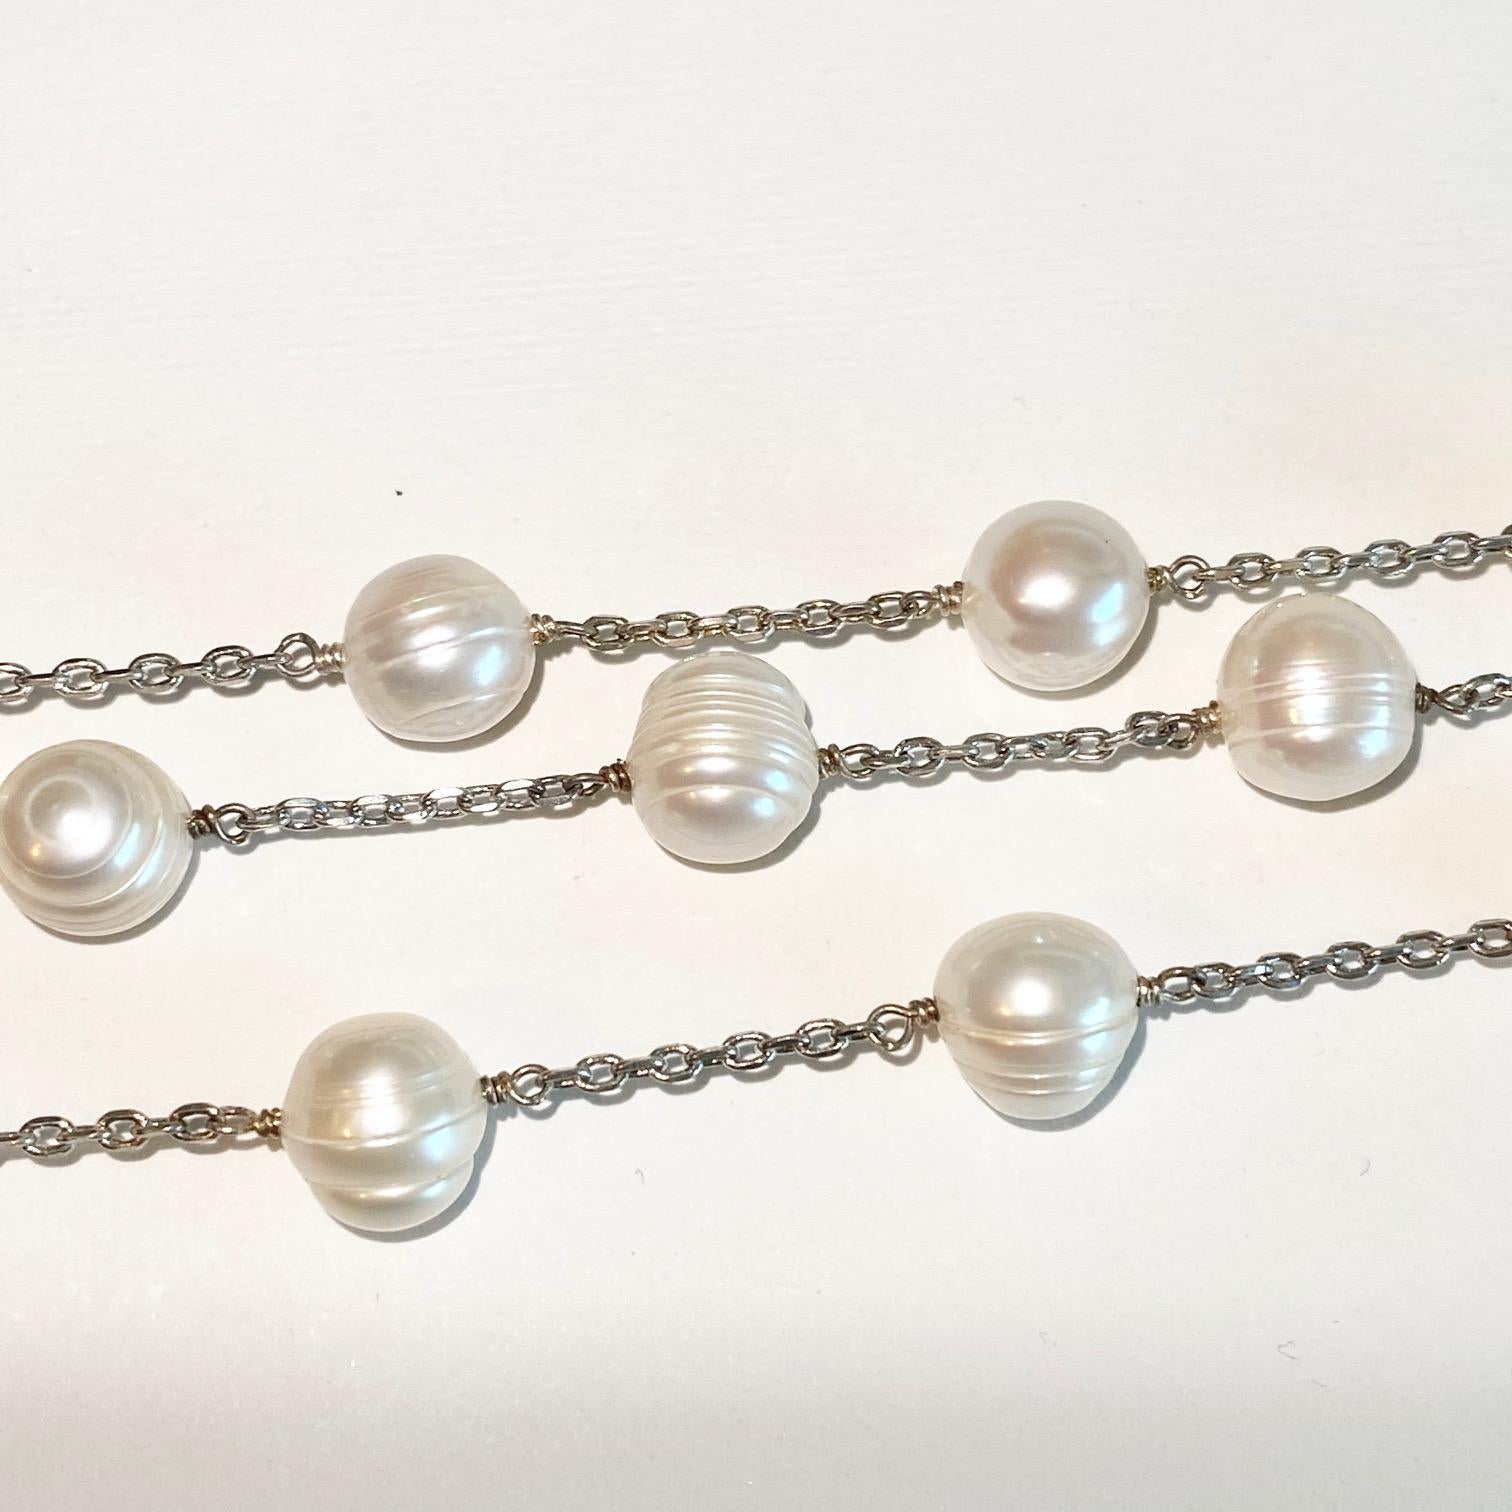 These pearls are super feminine and have a fantastic off white creamy hue to them! All the pearls match perfectly in their color and shape! Circle pearls are rare and have unique bands around the pearl! Their luster is stunning and goes well with